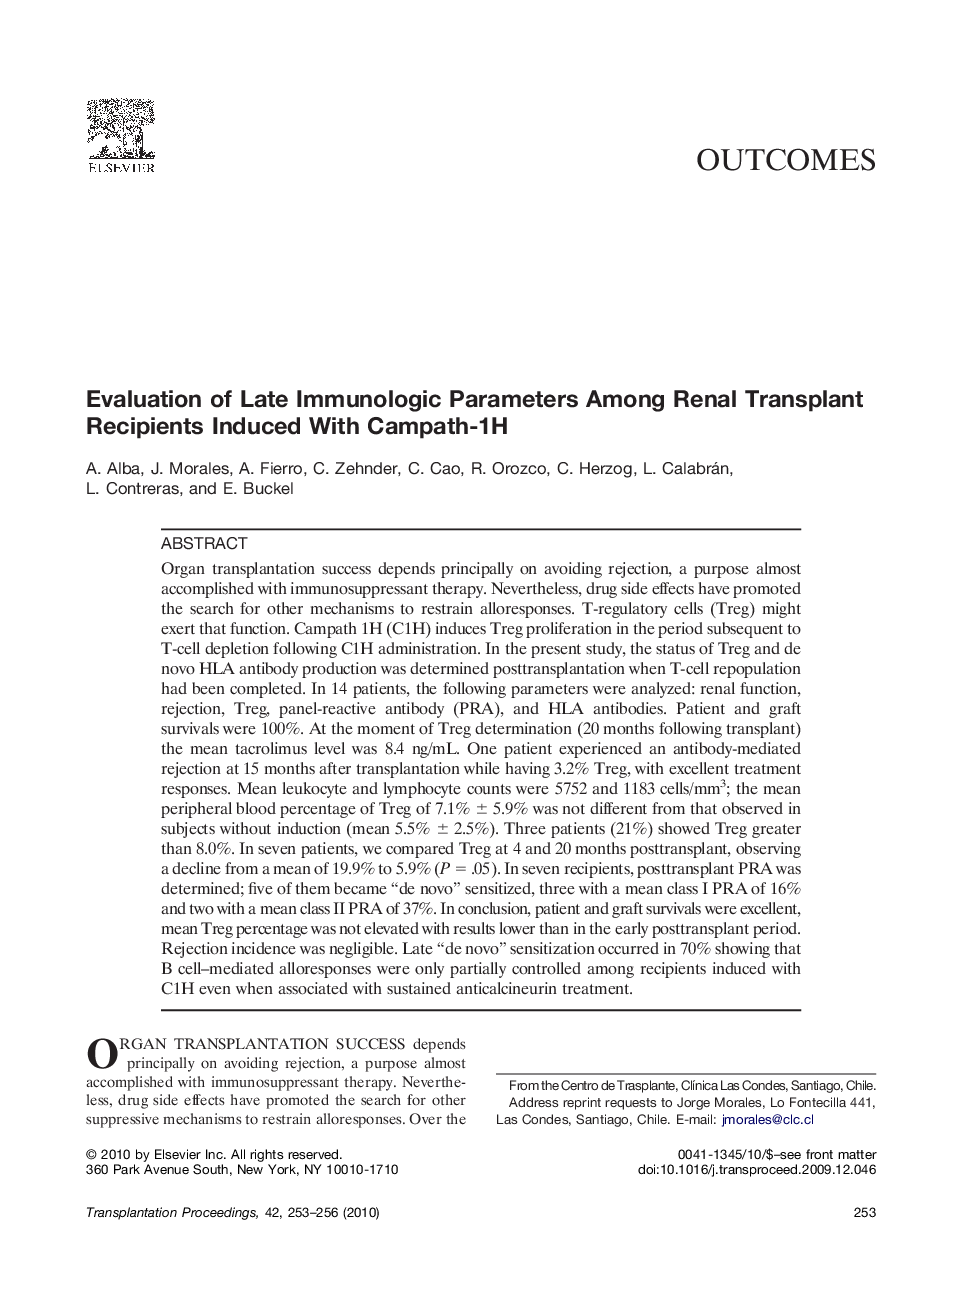 Evaluation of Late Immunologic Parameters Among Renal Transplant Recipients Induced With Campath-1H